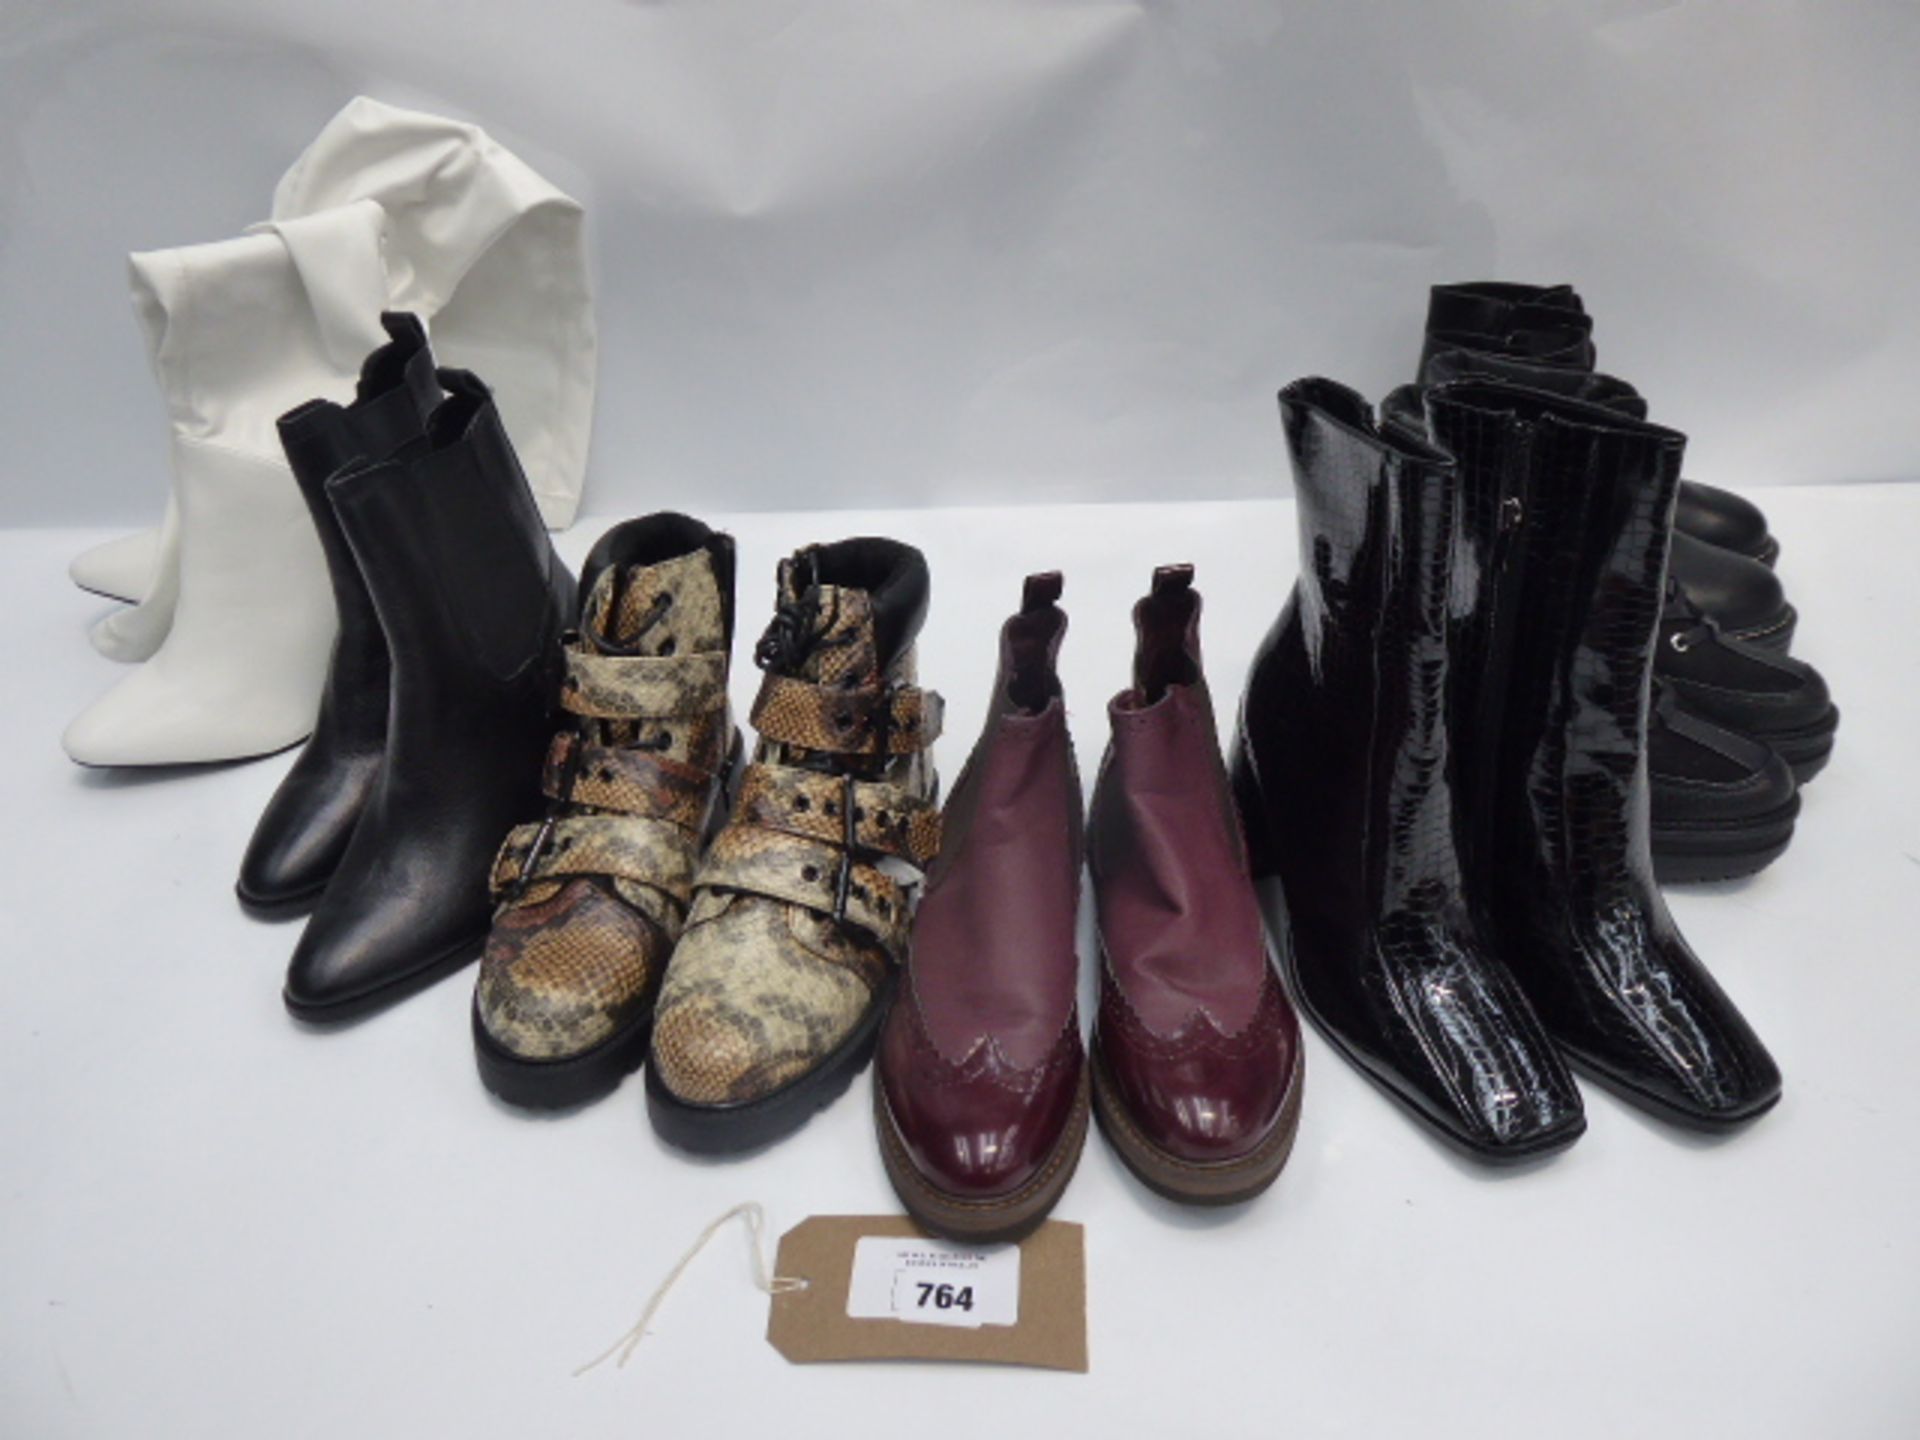 A selection of high and low heeled boots with brands including Pull & Bear, Koi Footwear, River